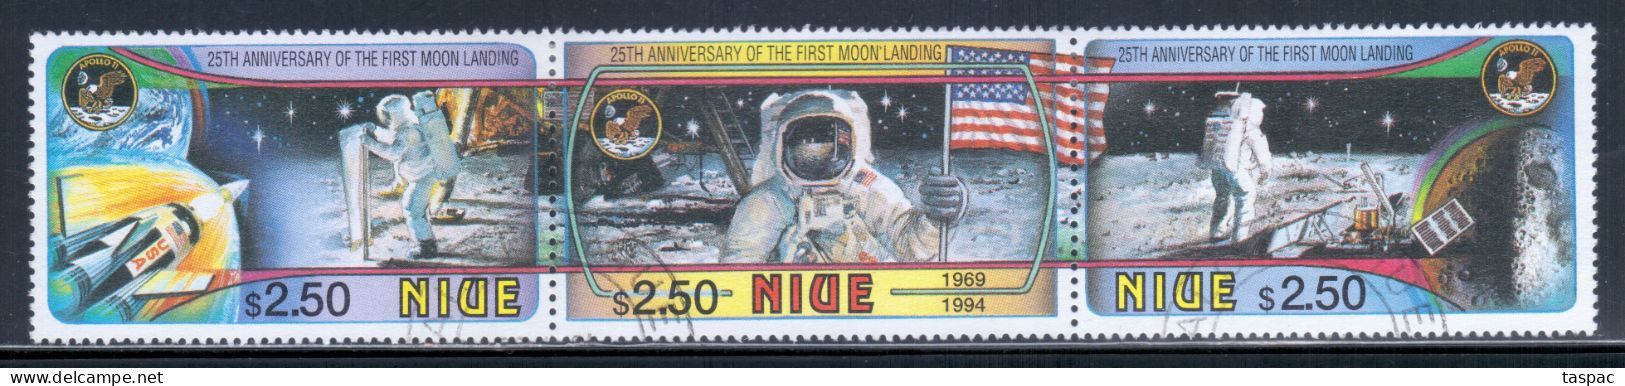 Niue 1994 Mi# 842-844 Used - Strip Of 3 - First Manned Moon Landing, 25th Anniv. / Space - Océanie